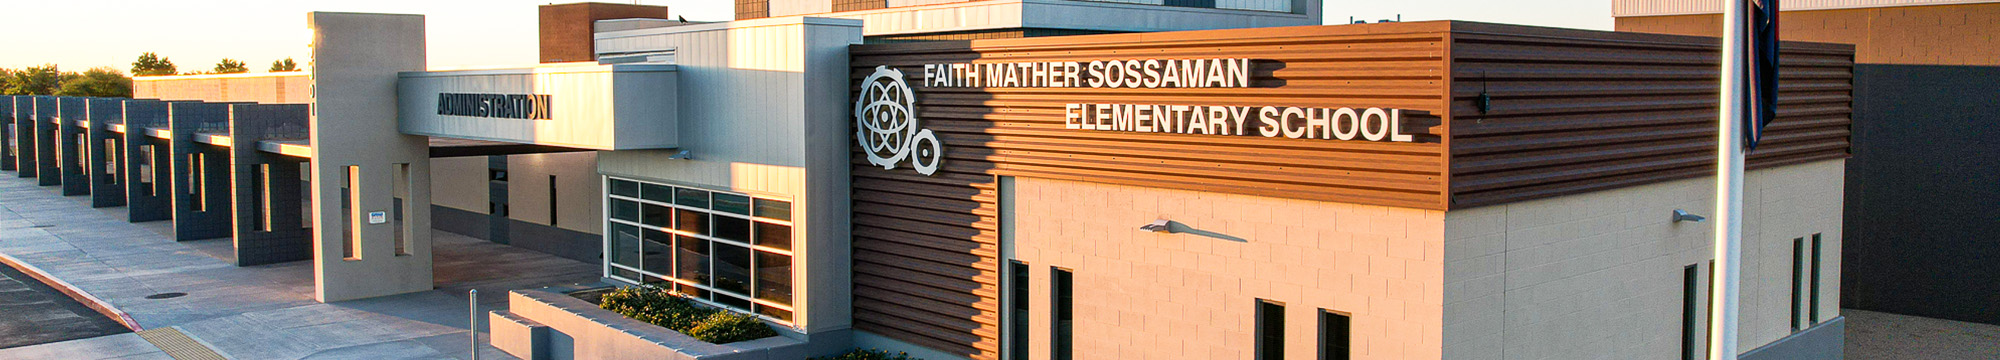 Front view of Faith Mather Sossaman Elementary School building